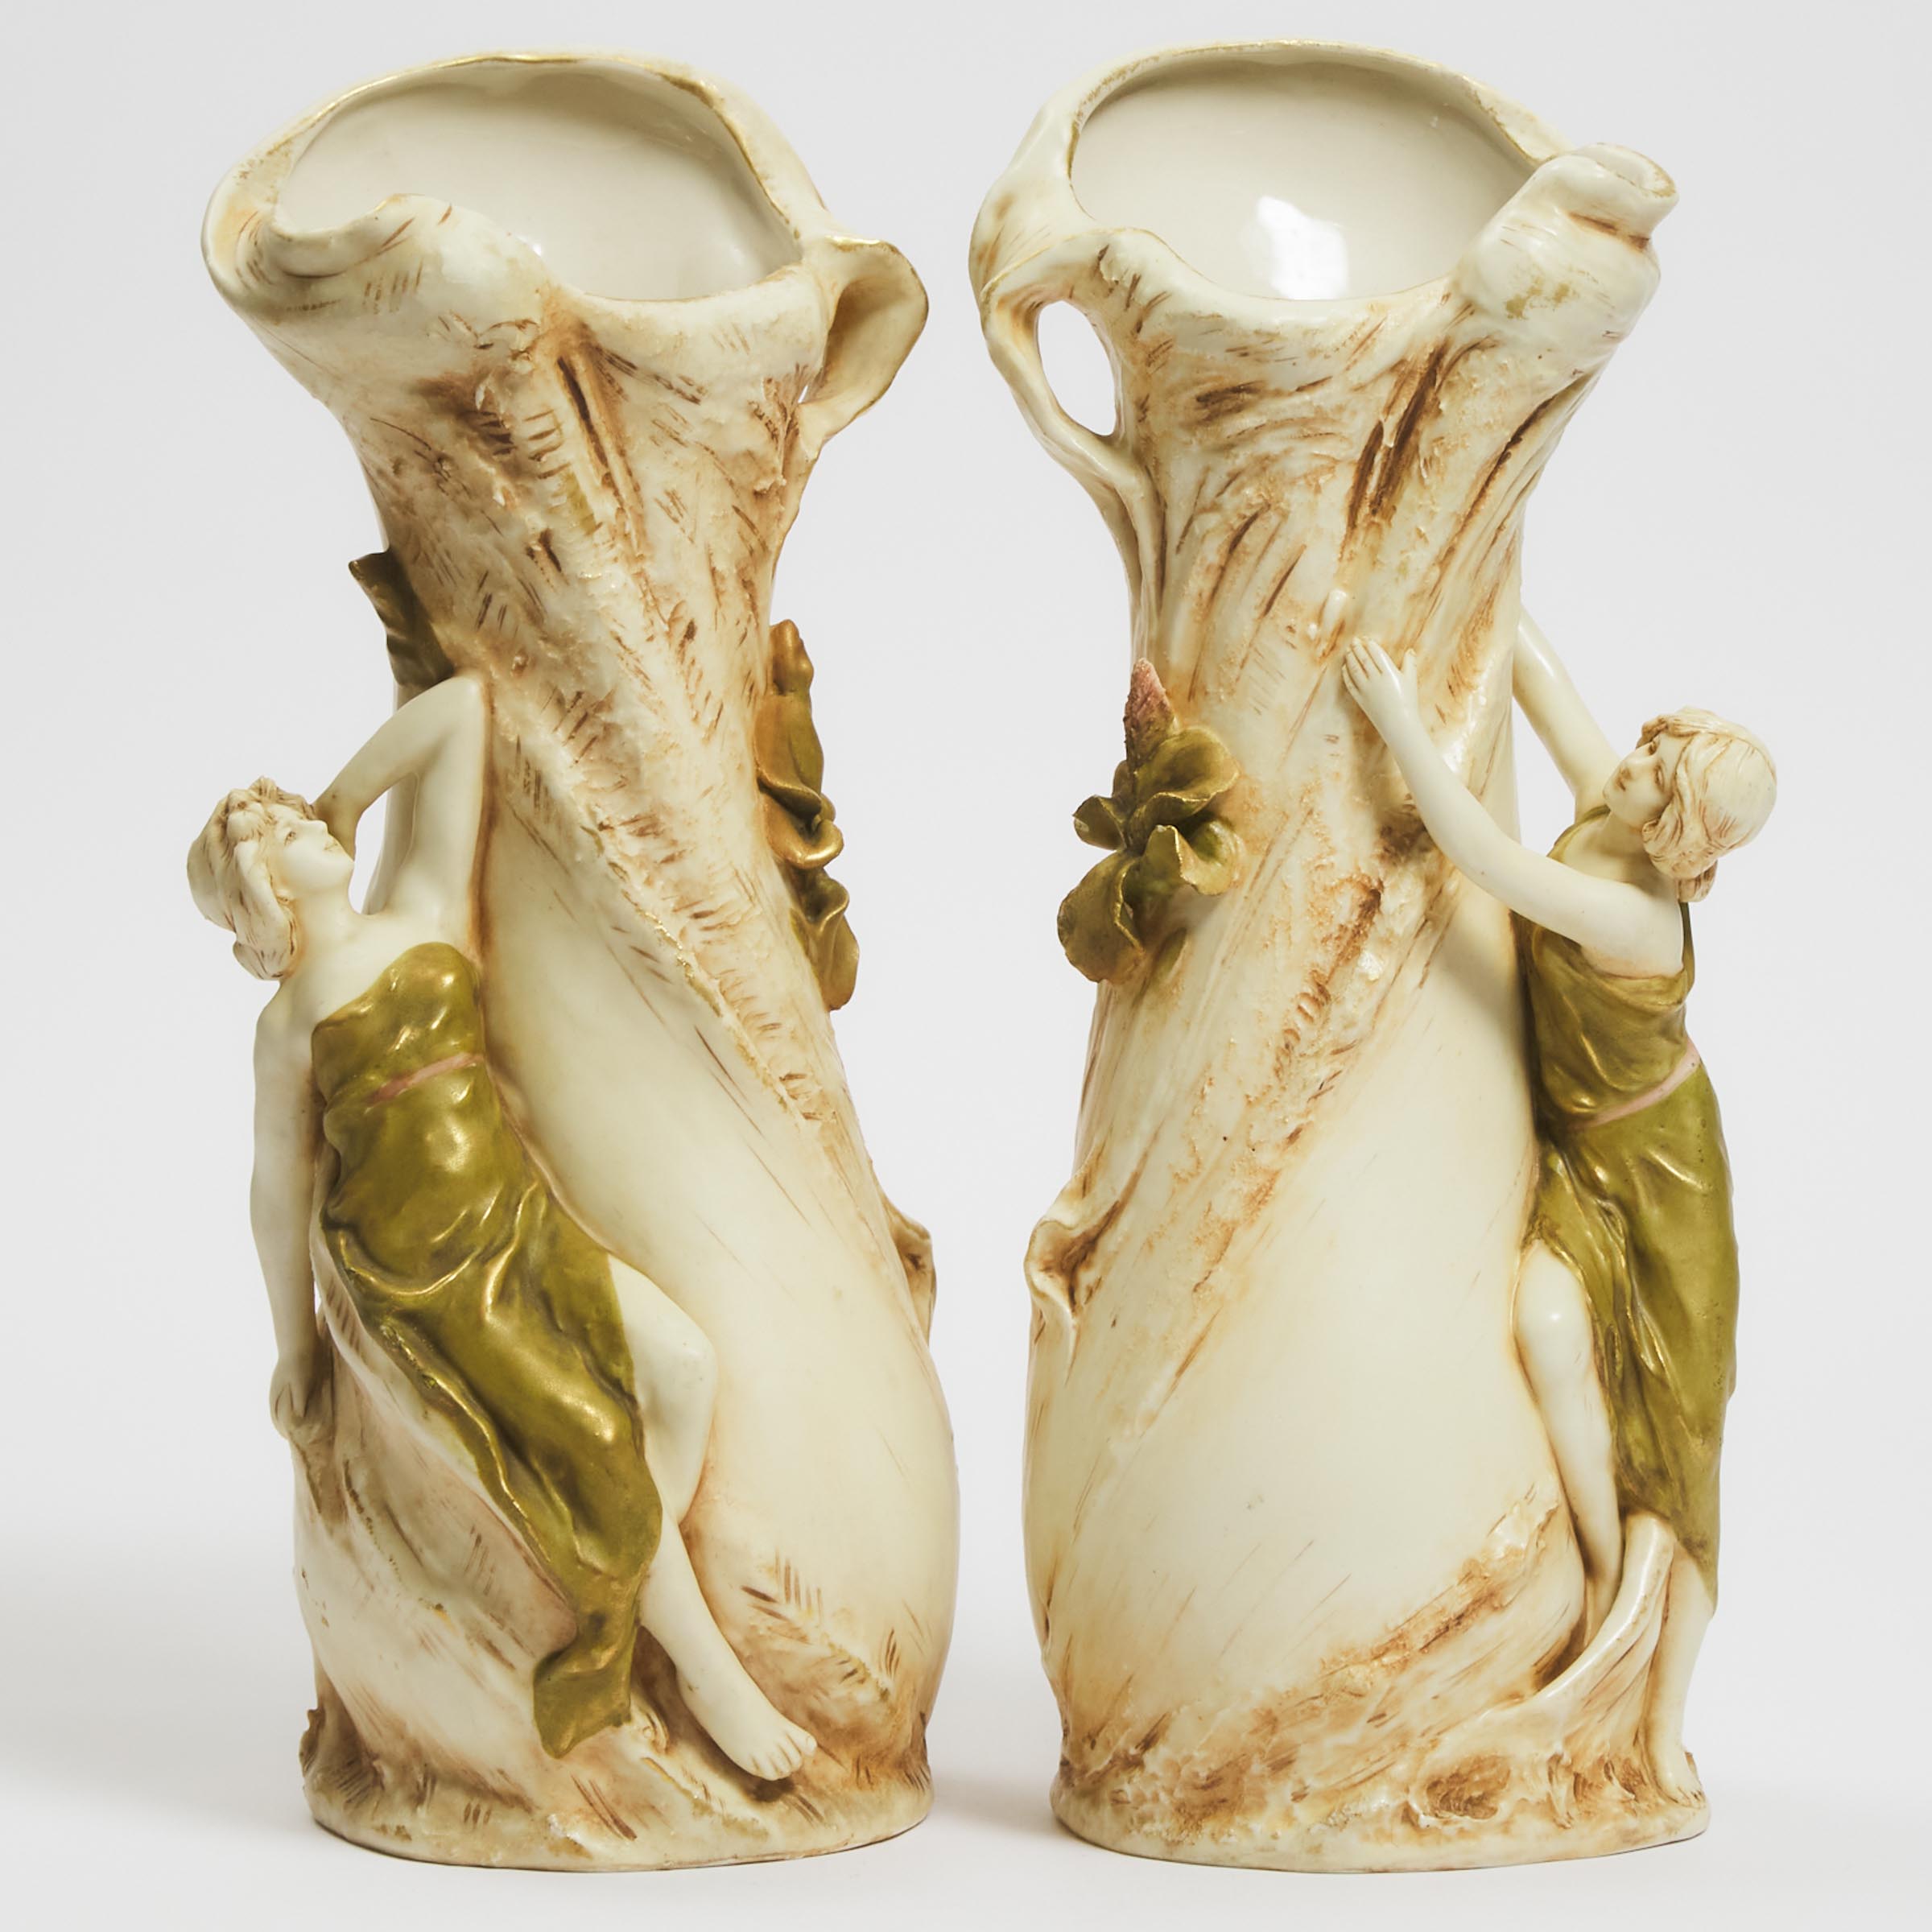 Pair of Royal Dux Figural Vases, early 20th century